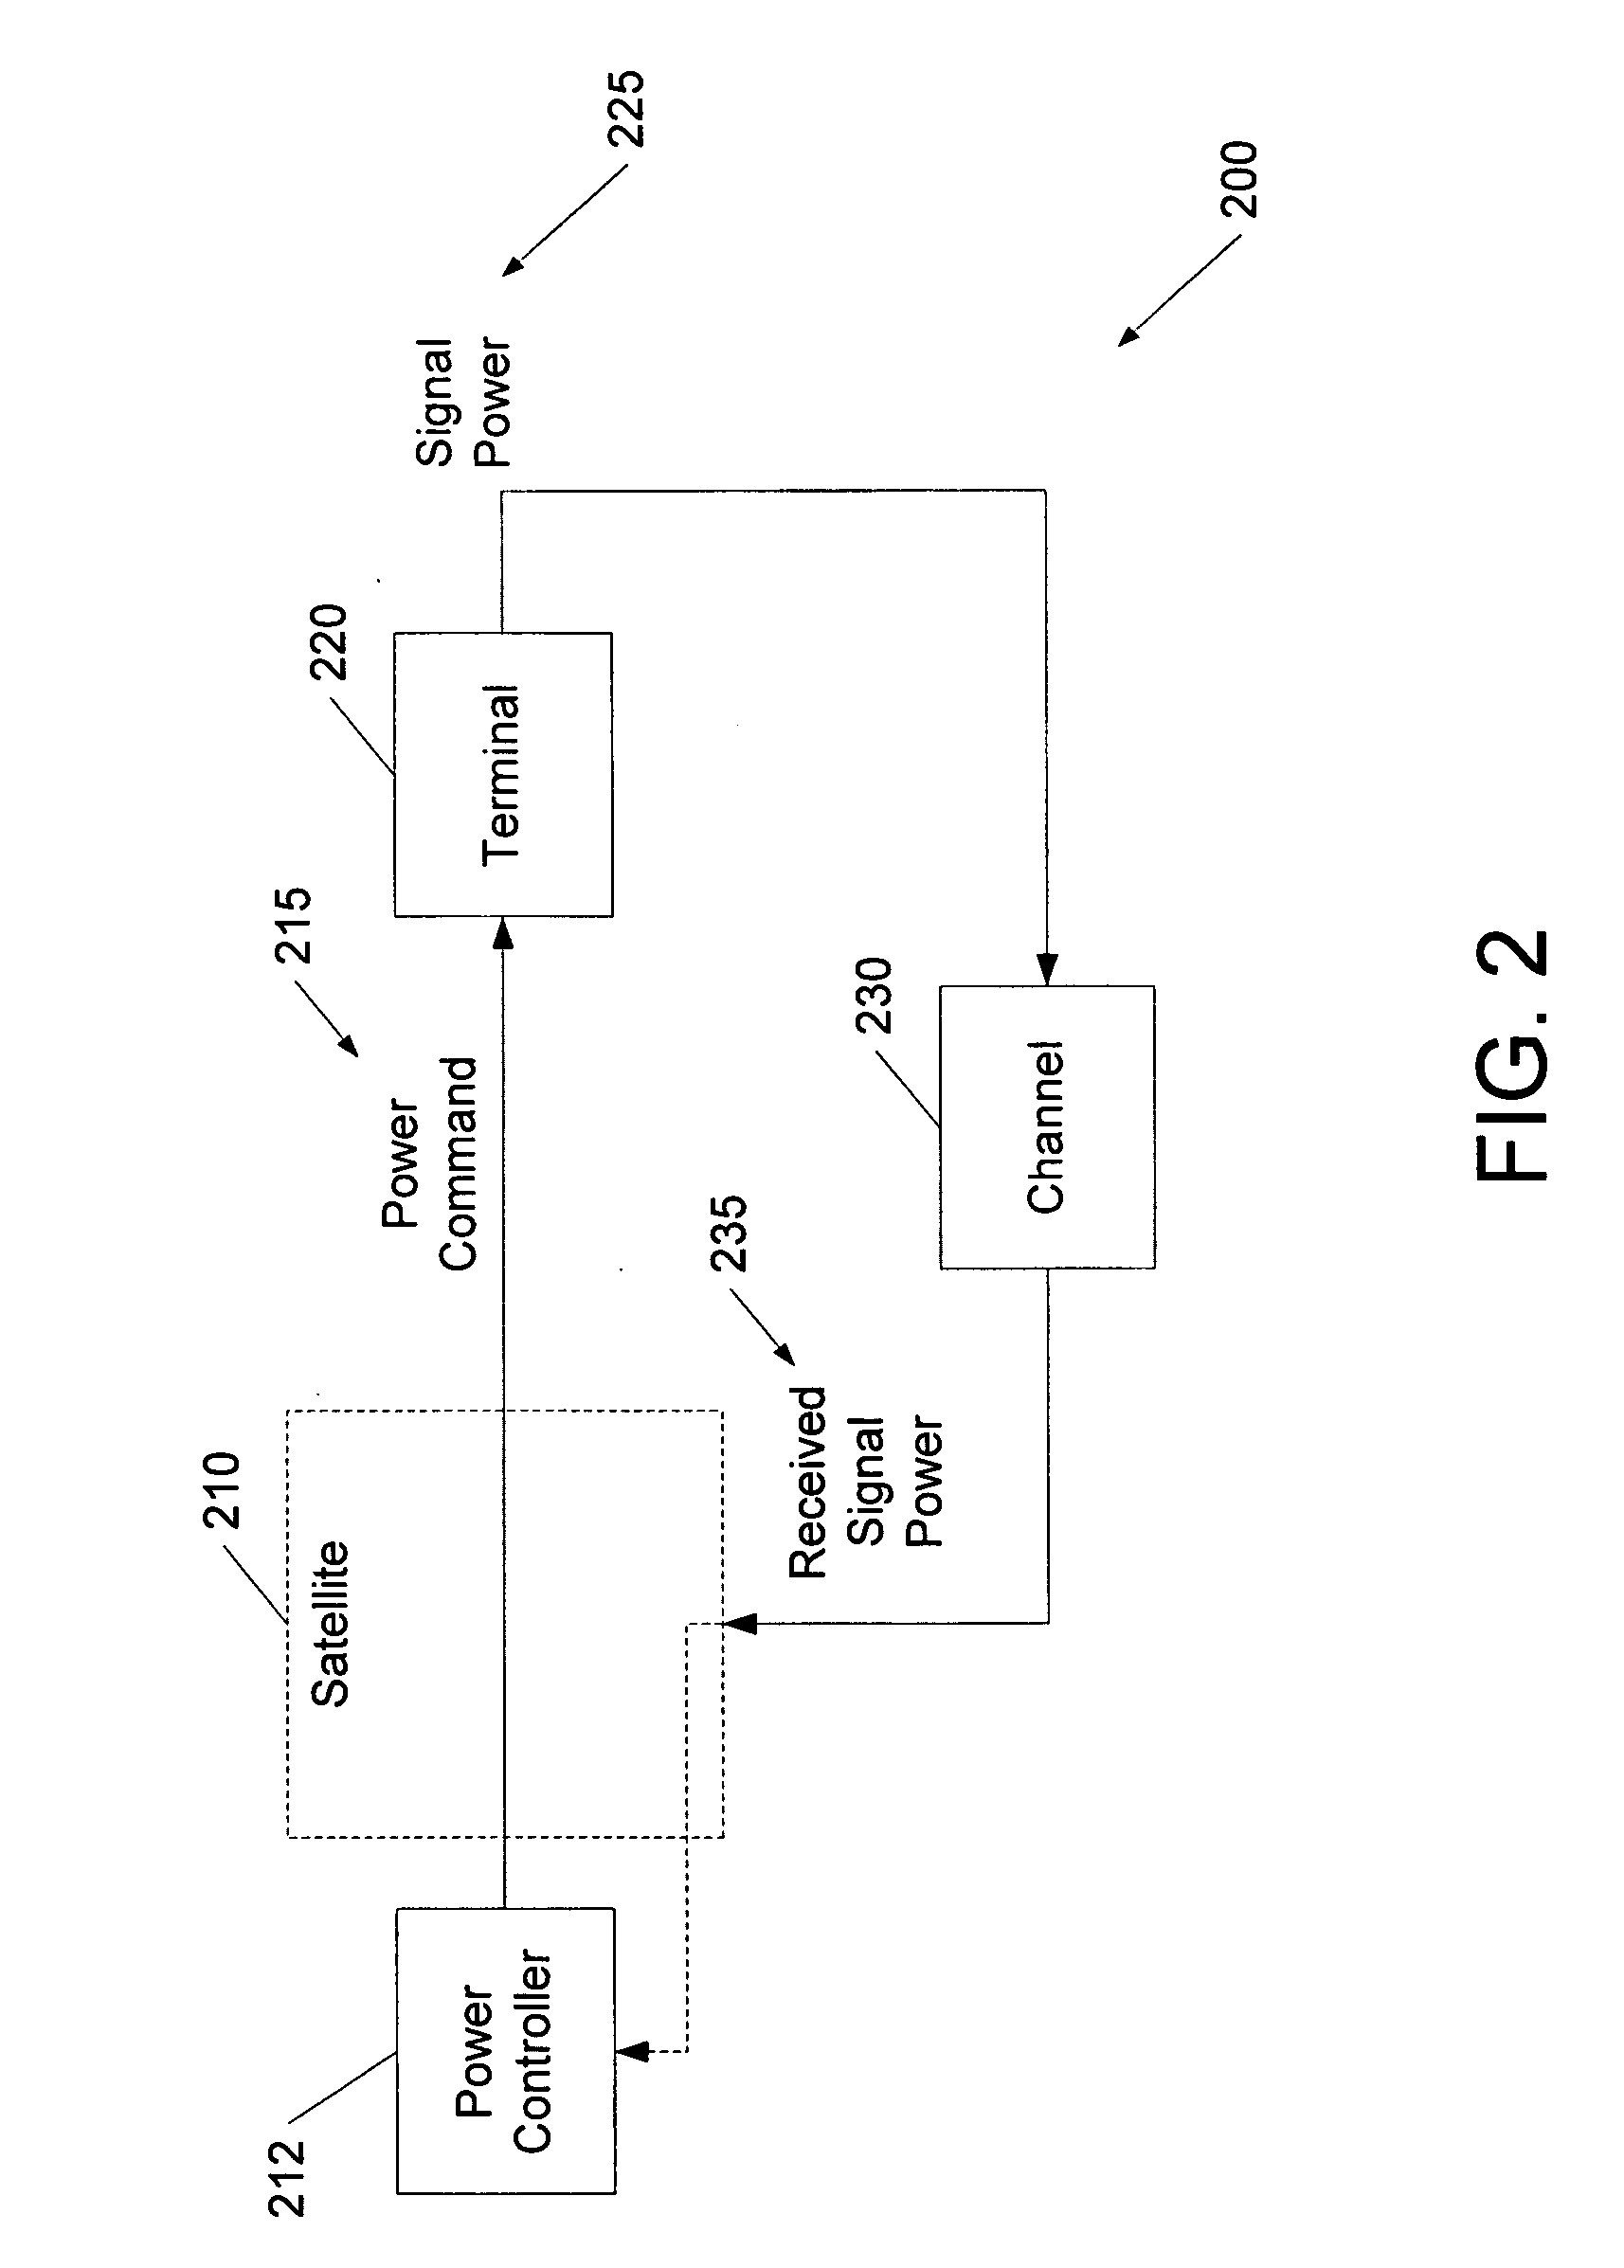 Apparatus and methods for power control in satellite communications systems with satellite-linked terrestrial stations